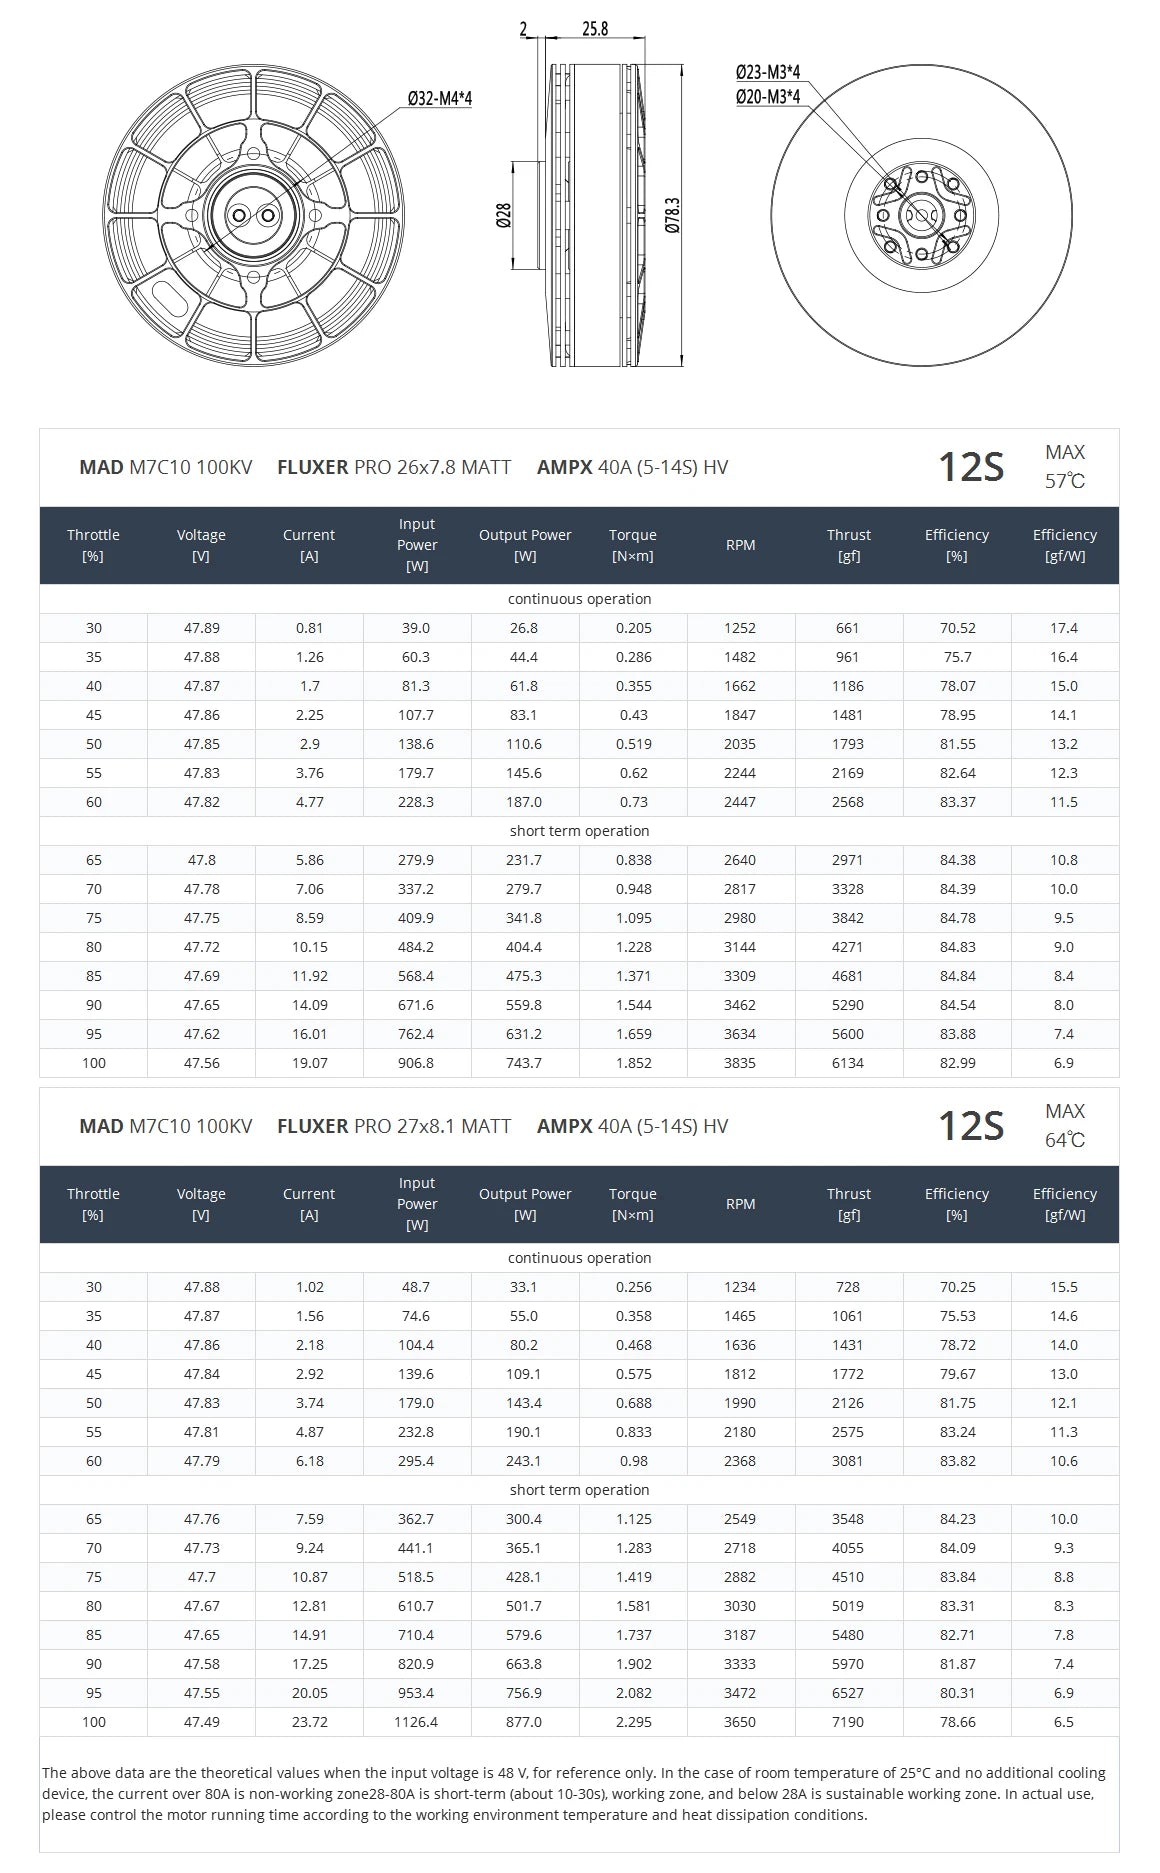 MAD M7C10 V3 Drone Motor Specifications and Performance Data